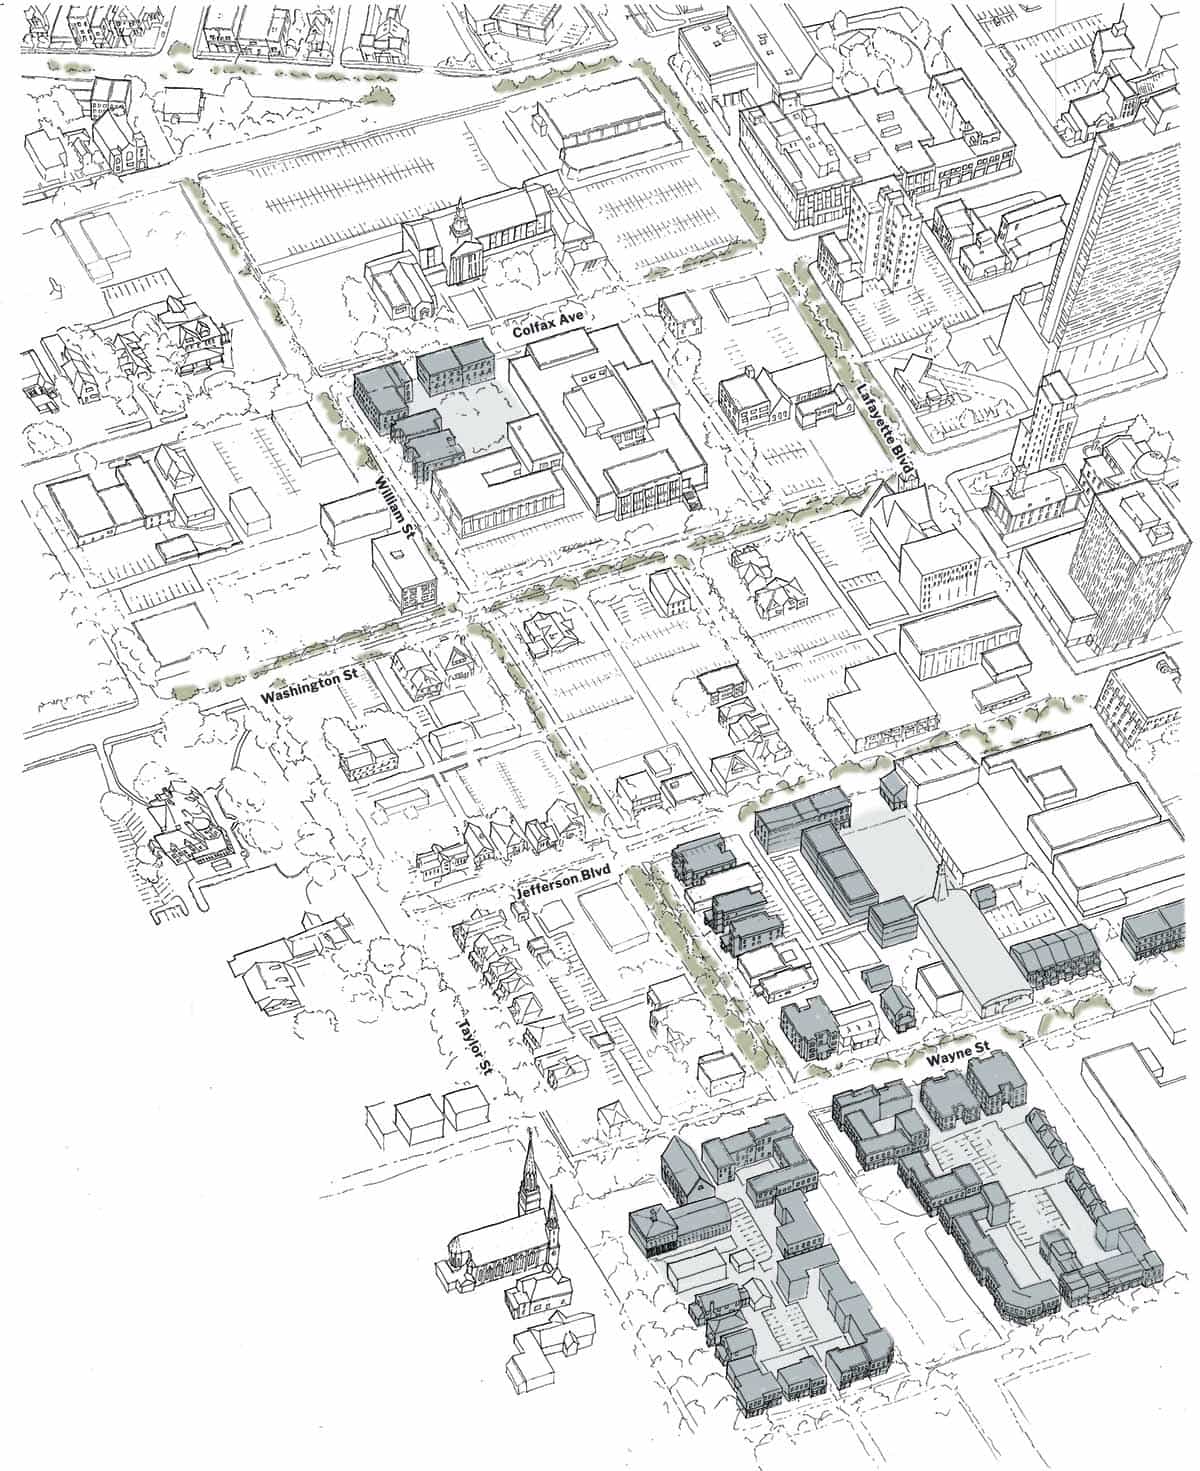 An aerial view drawing of downtown South Bend highlighting three public spaces.